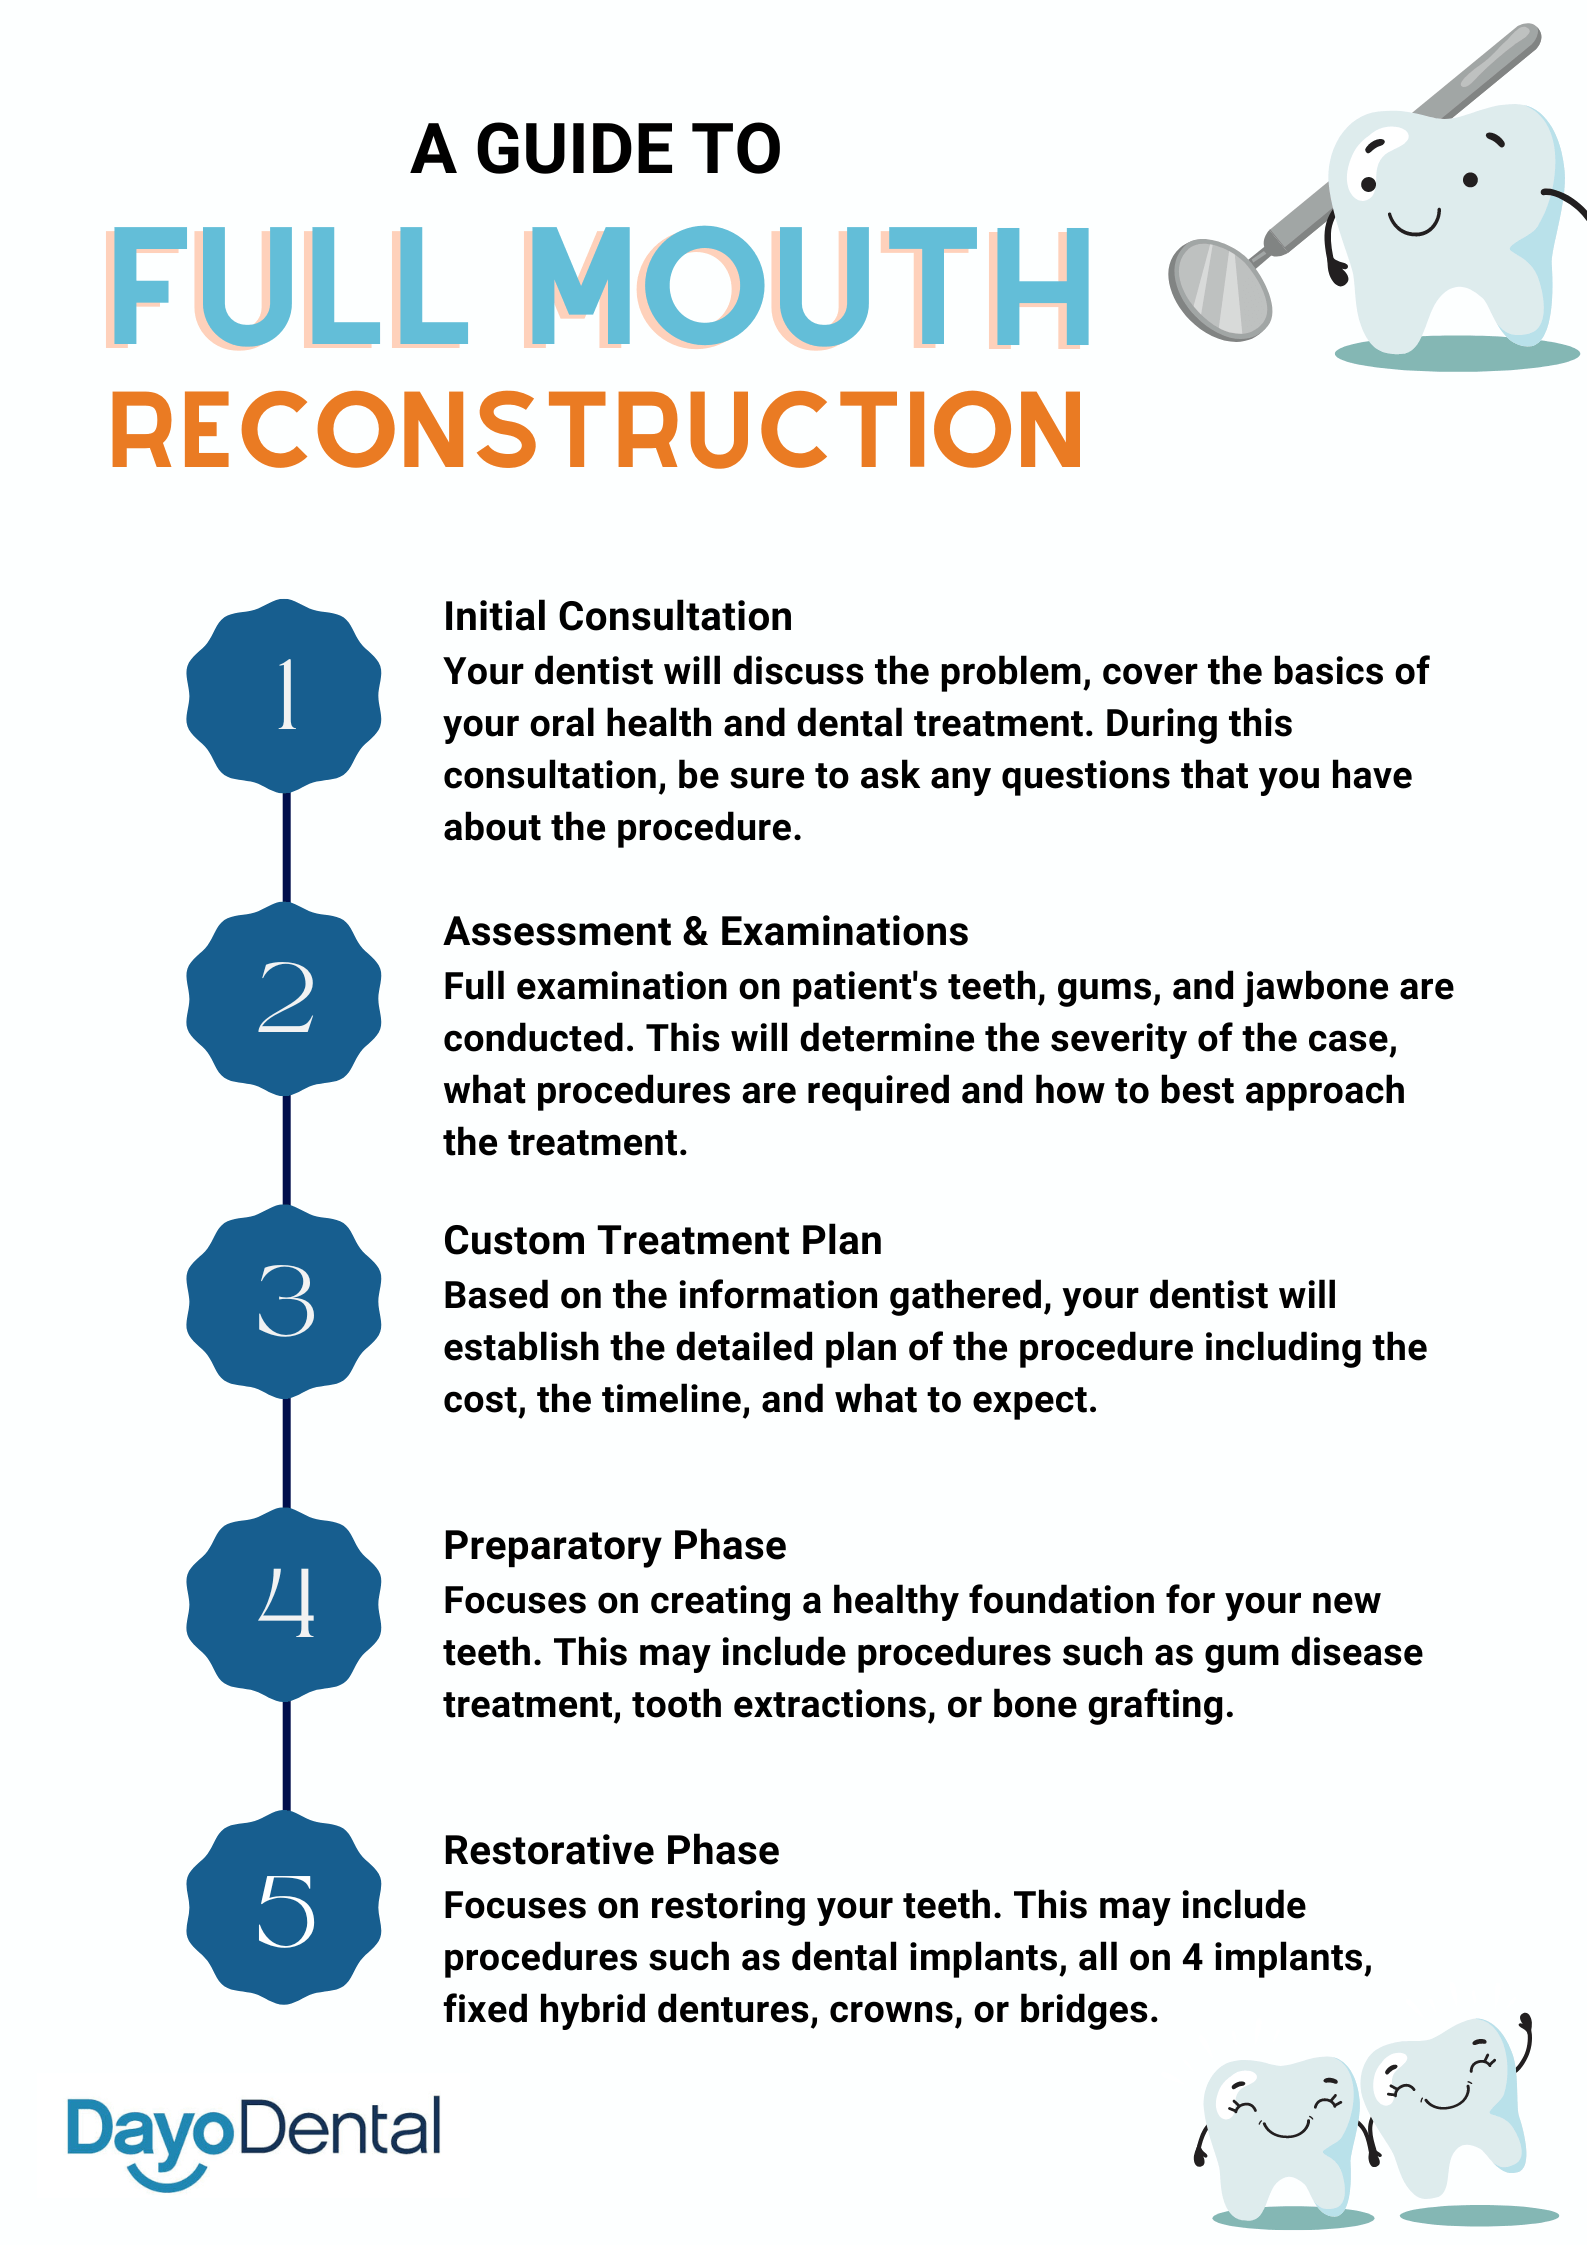 A guide to full mouth reconstruction process